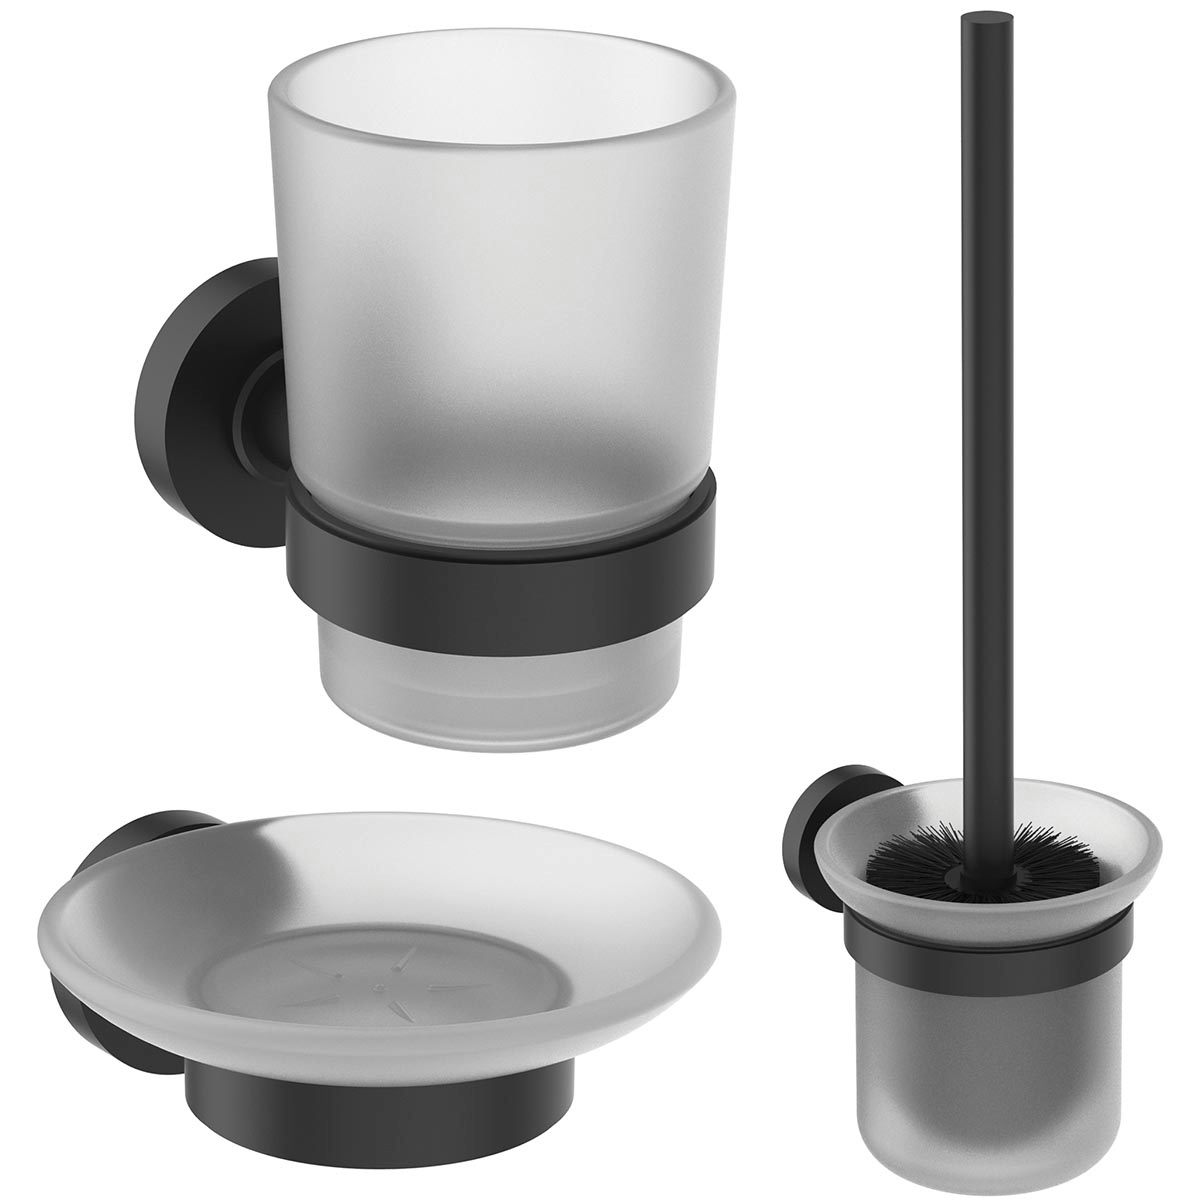 Ideal Standard IOM silk black soap dish, toothbrush and toilet roll holder set